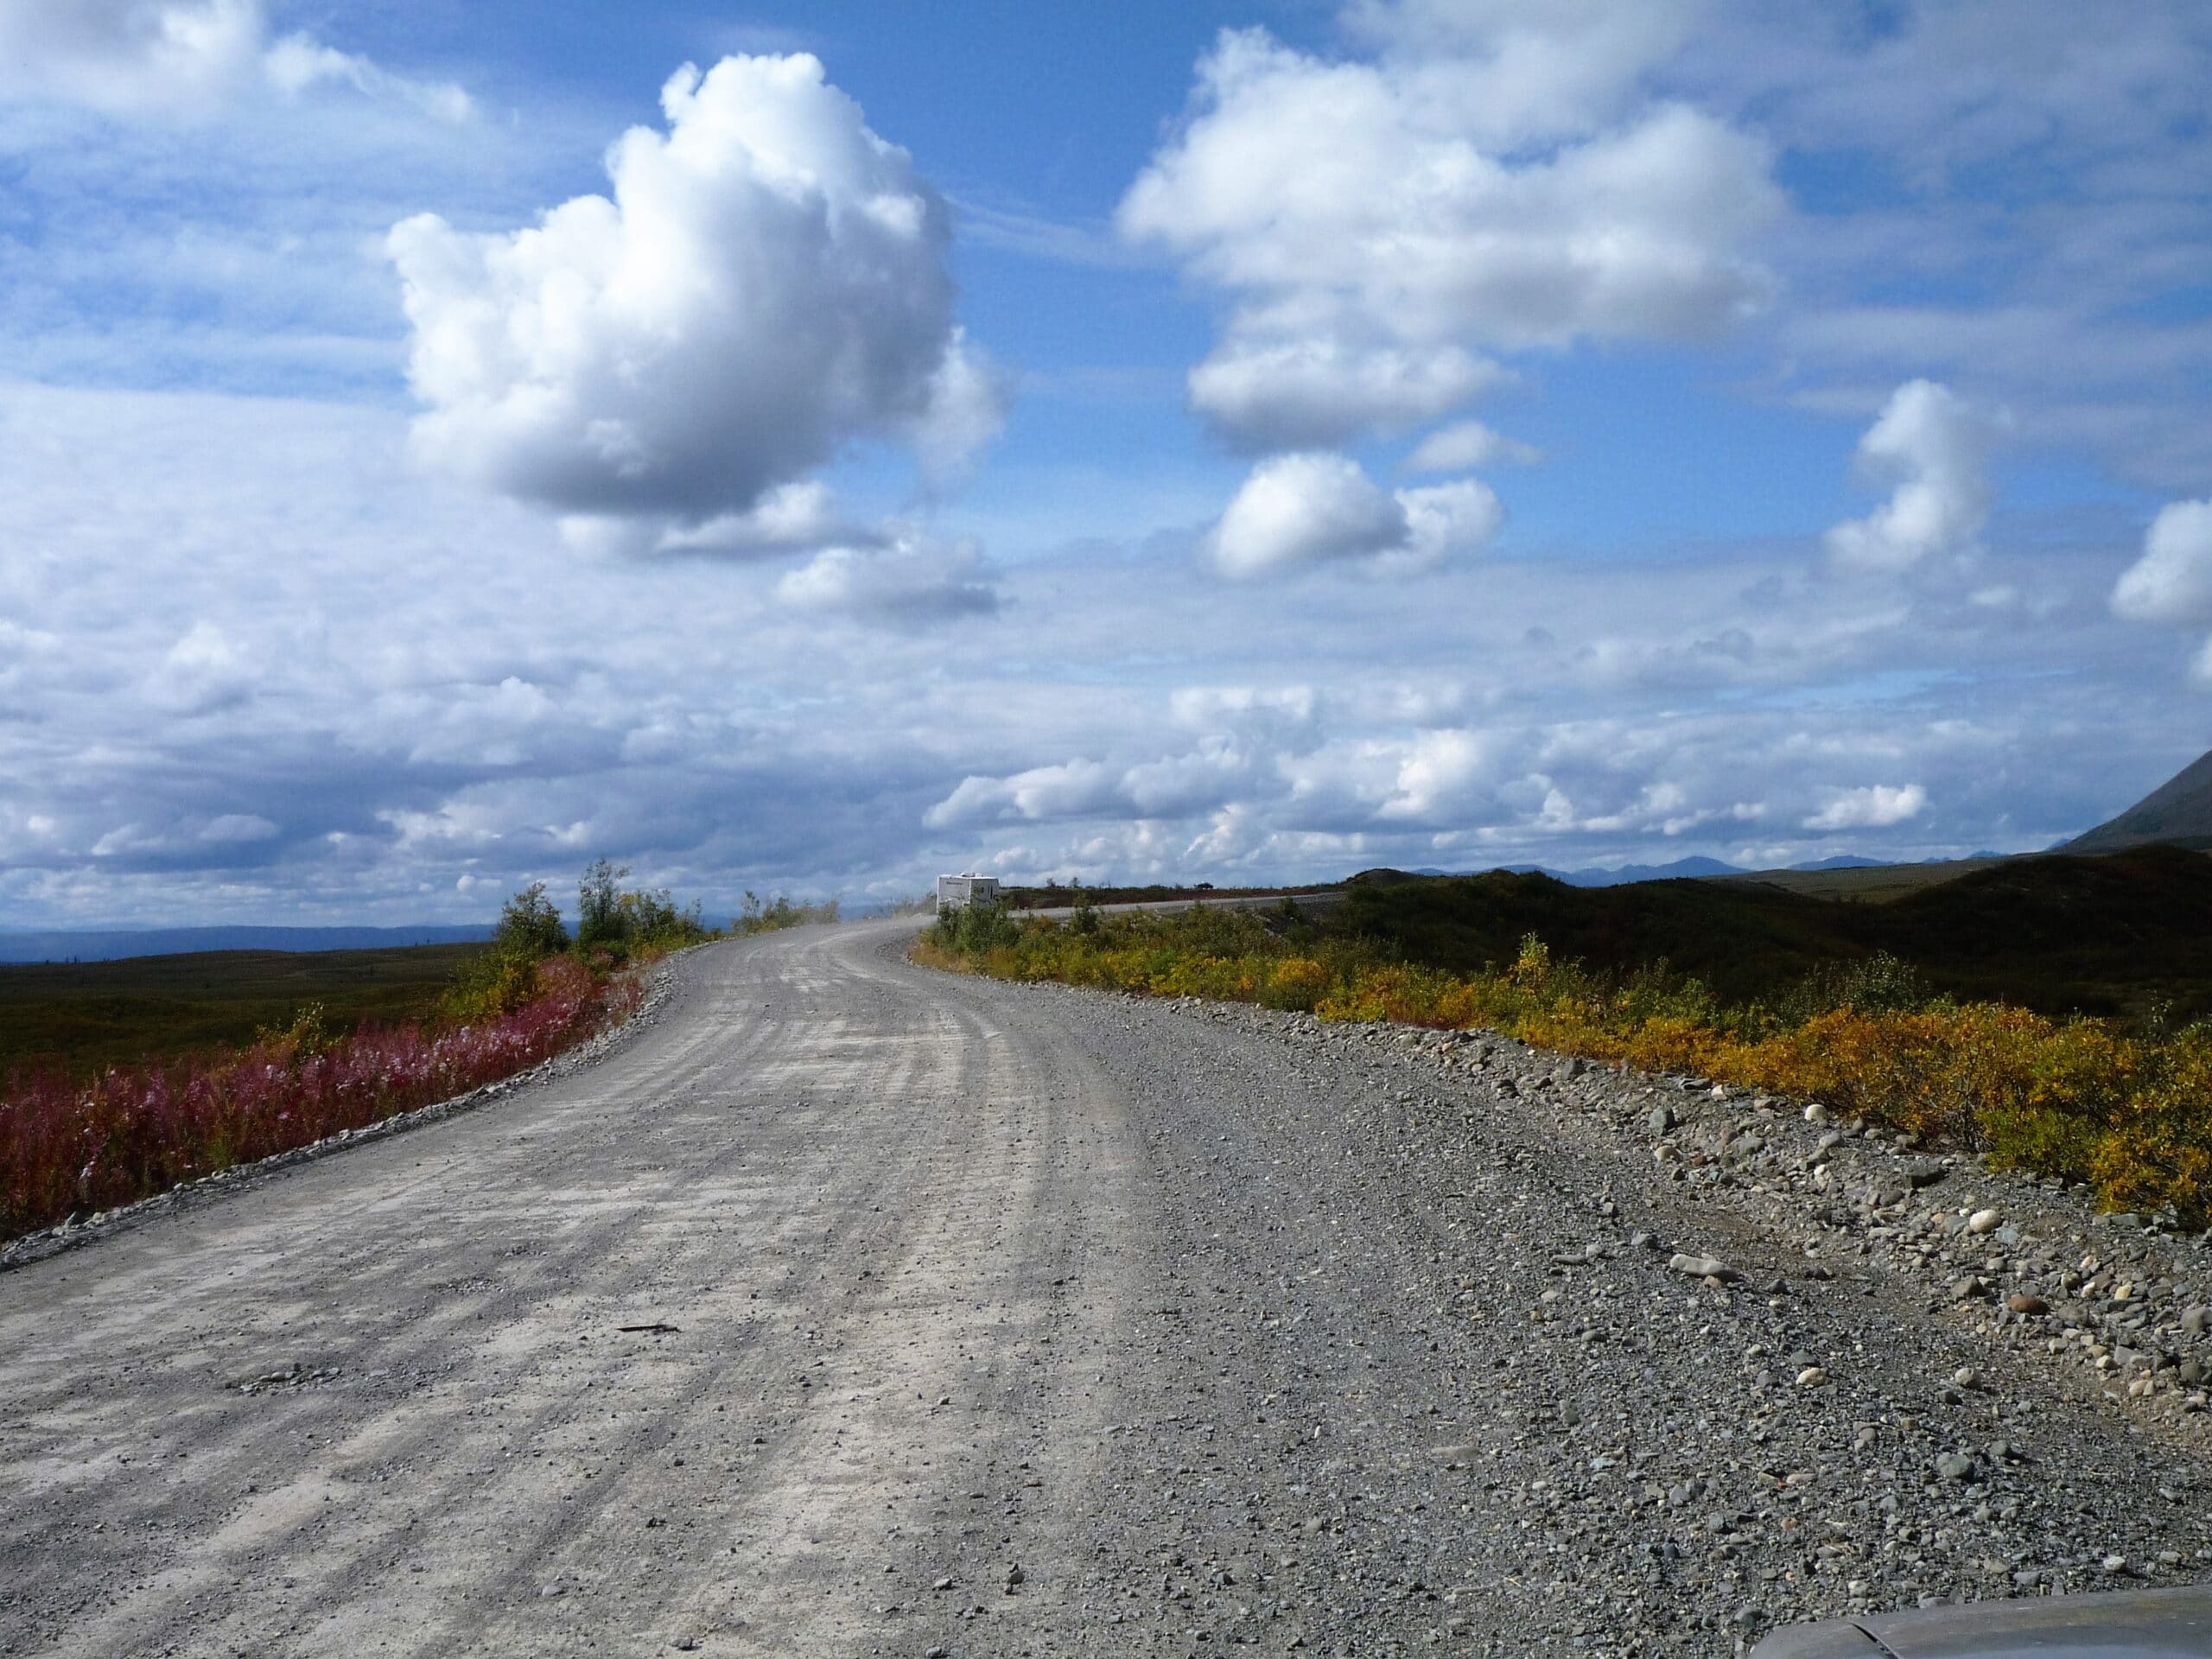 Gravel road with blue sky and some clouds